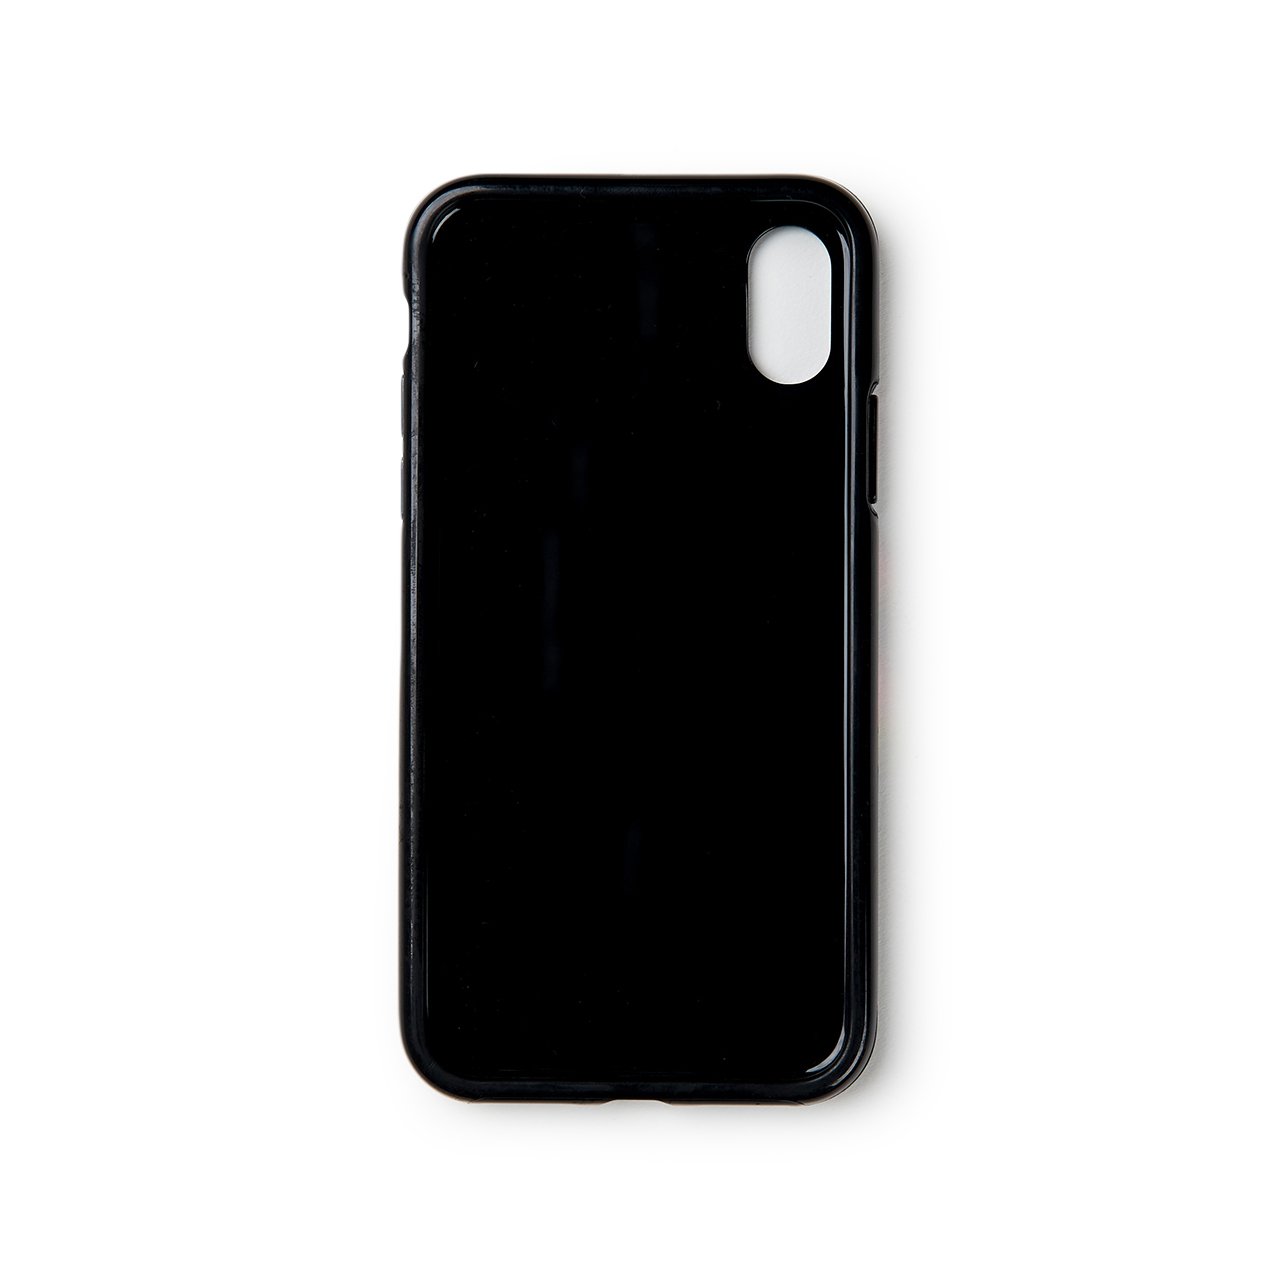 perks and mini post human phone case (multi) - 9699-a-mlt - a.plus - Image - 3